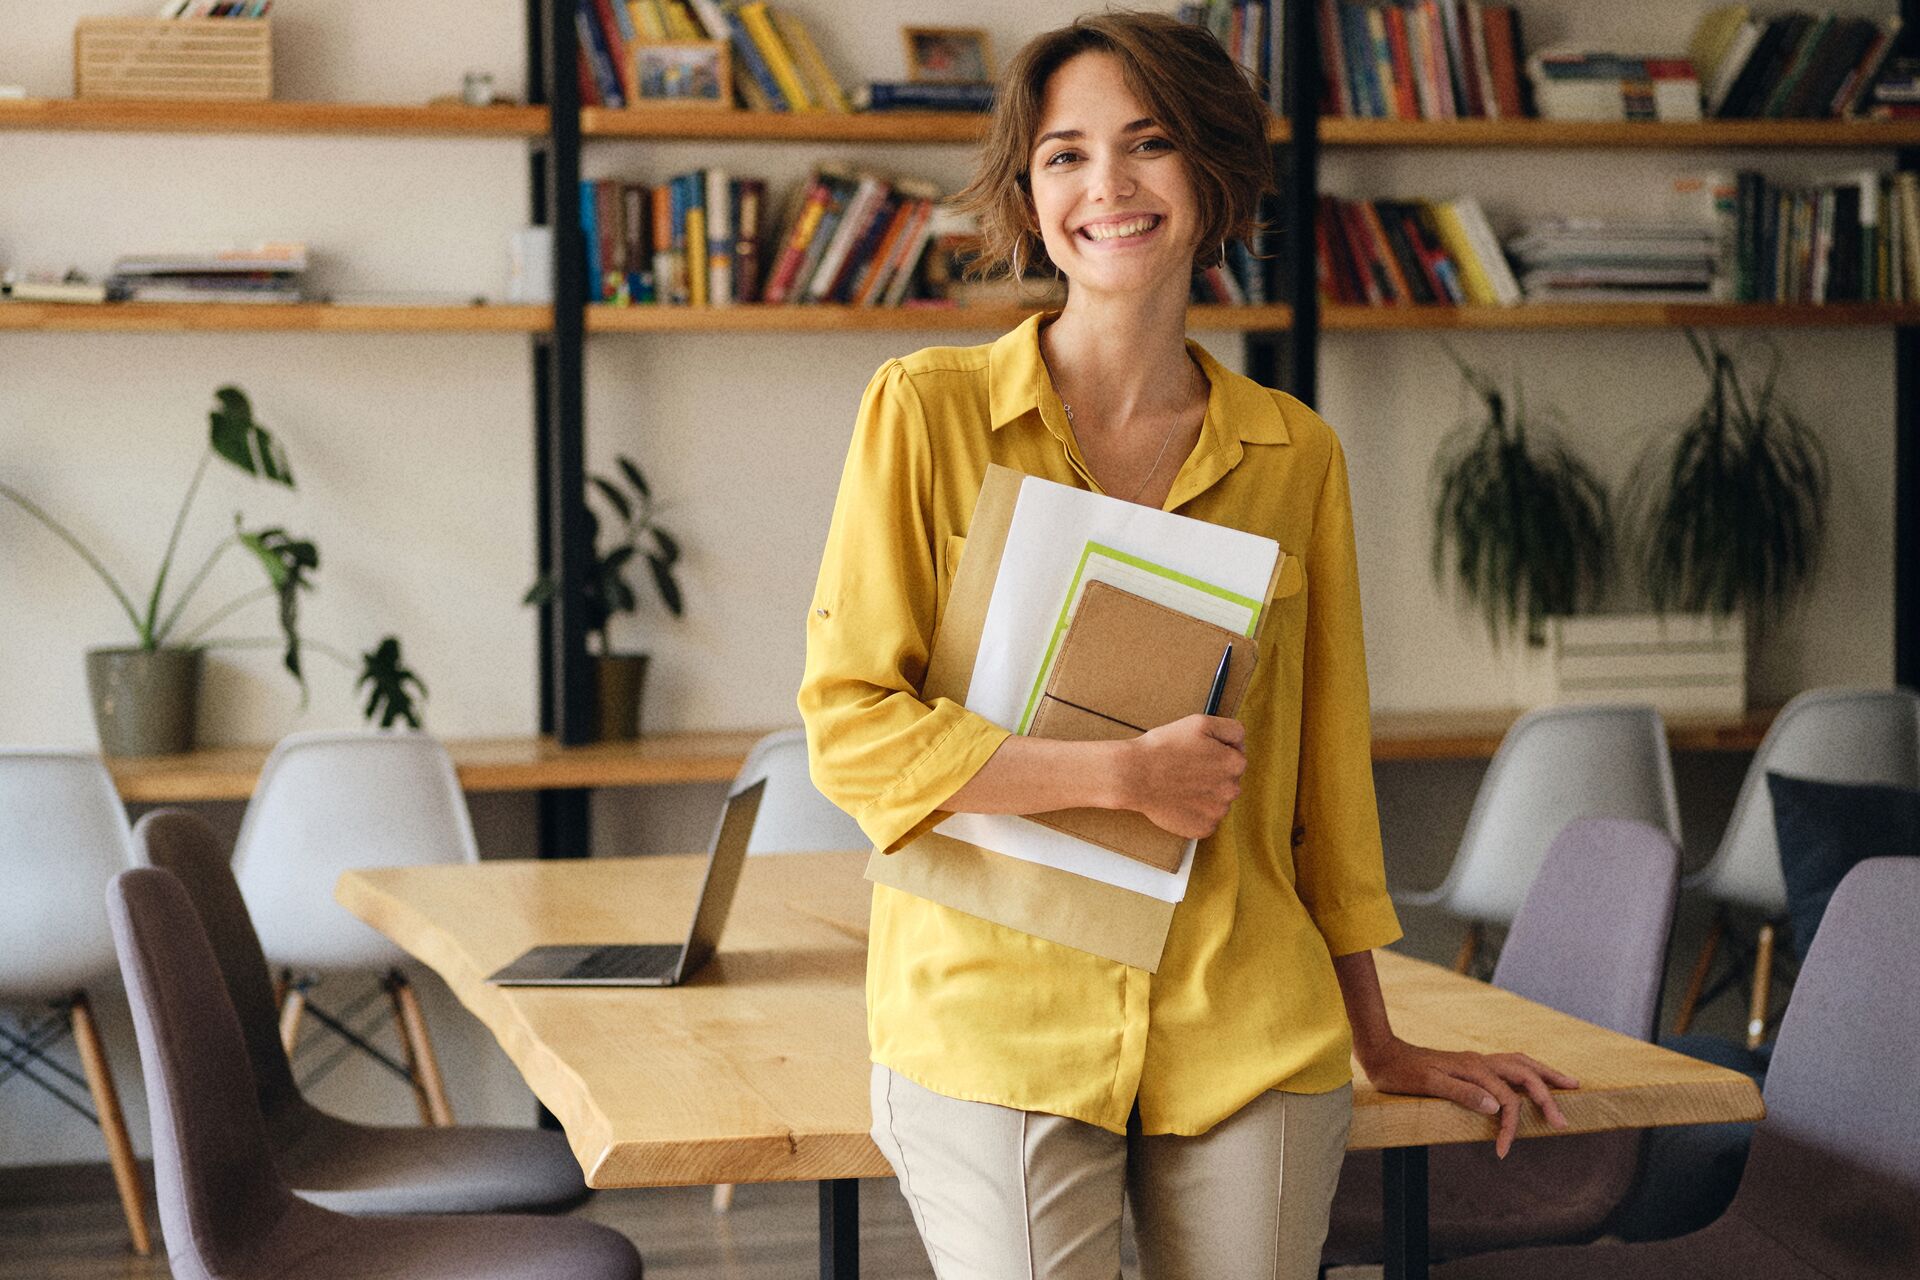 Young cheerful woman in yellow shirt leaning on desk with notepad and papers in hand joyfully looking in camera in modern office